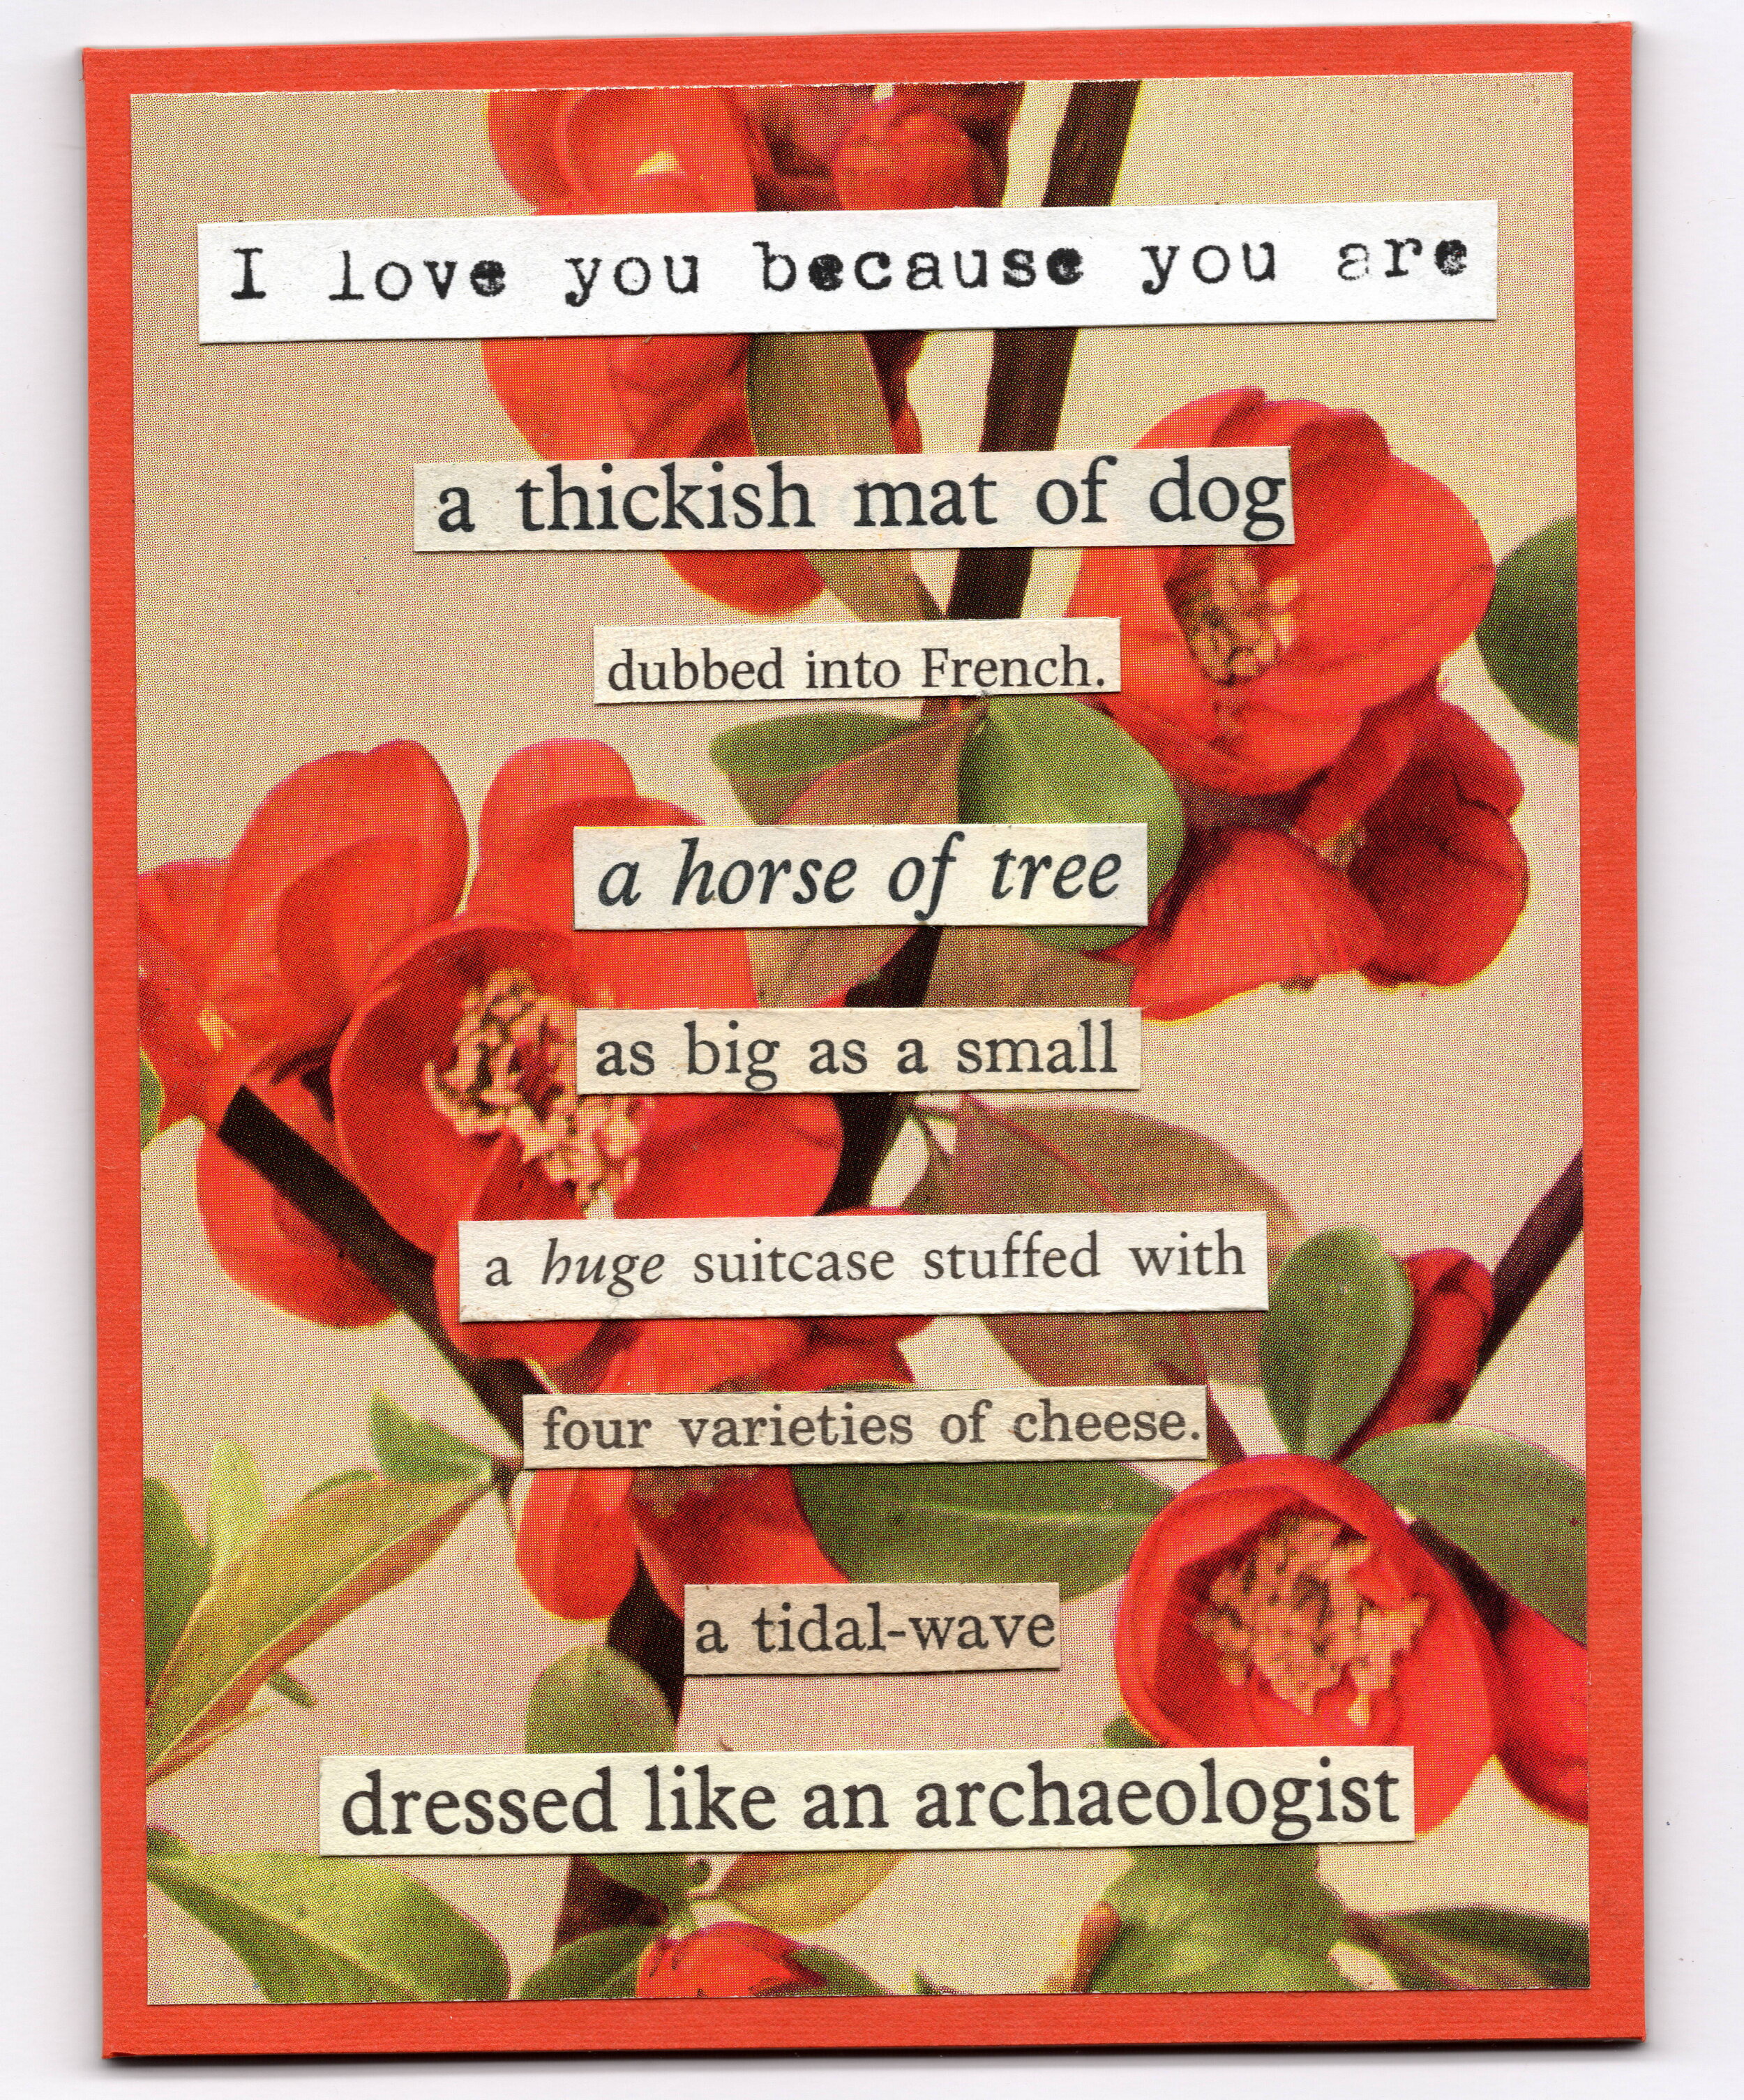 Love Poem (a thickish mat of dog)